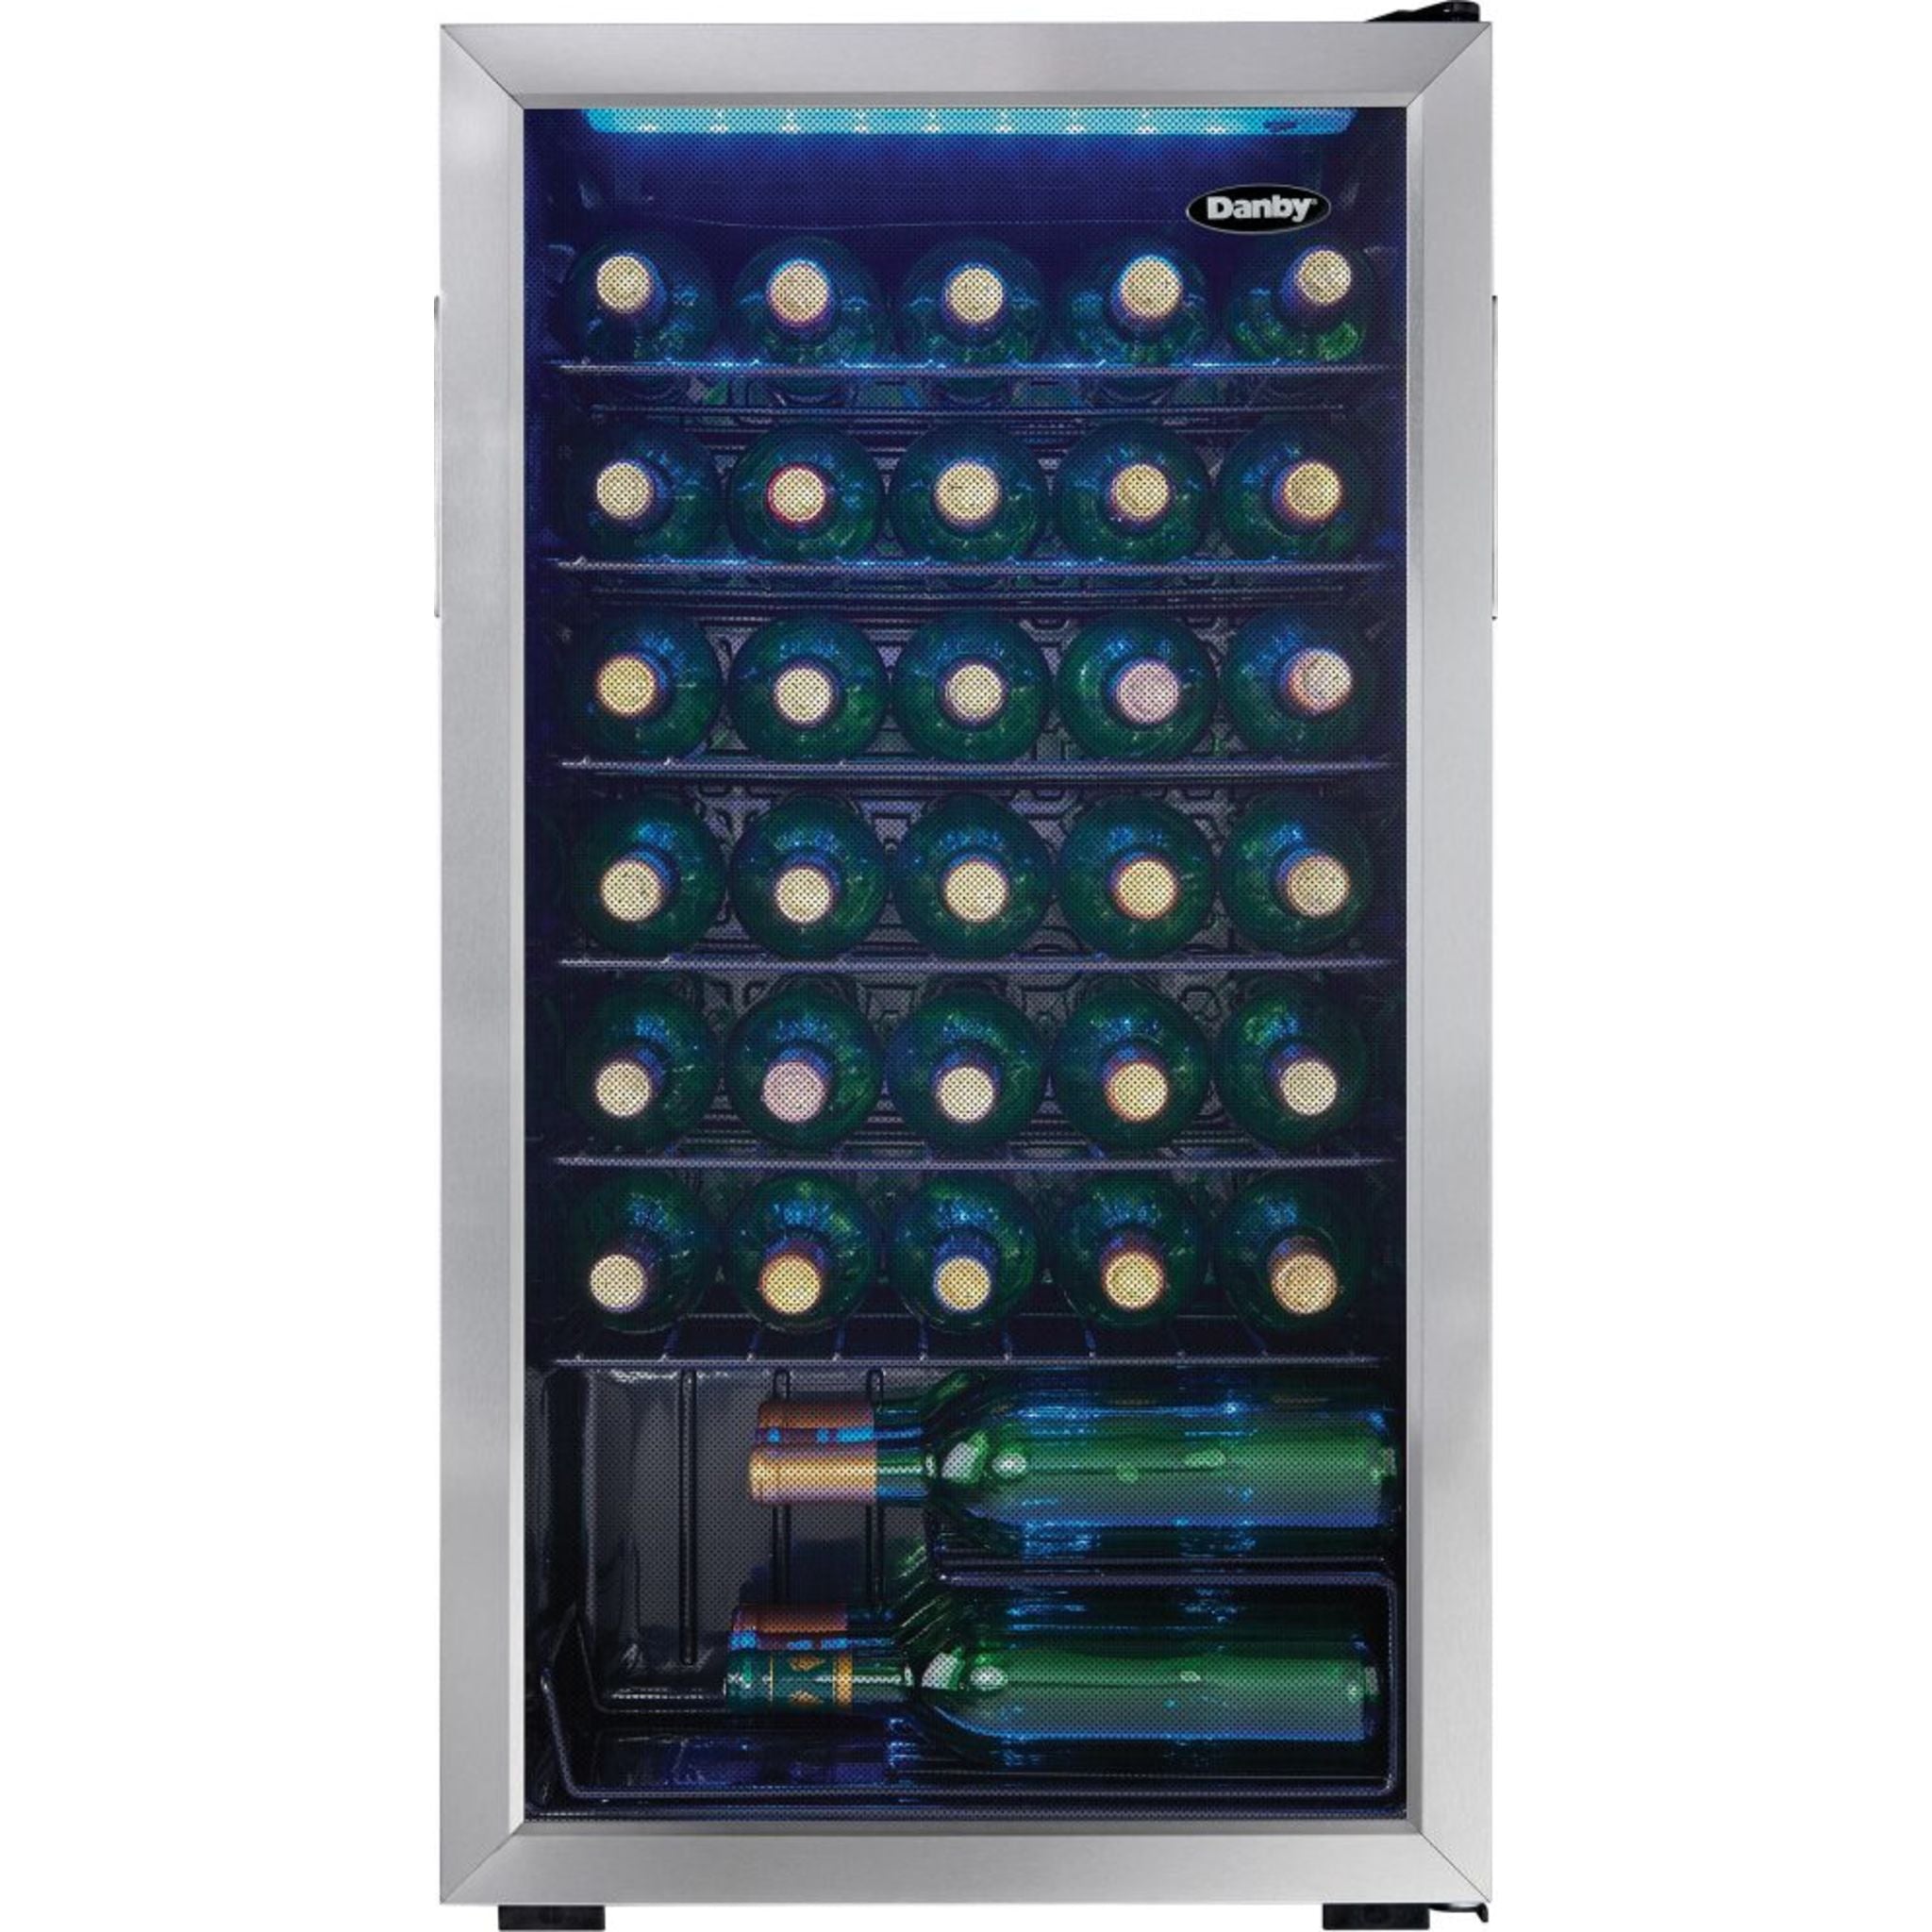 Danby, Danby Wine Cooler (DWC036A1BSSDB-6) - Stainless Steel